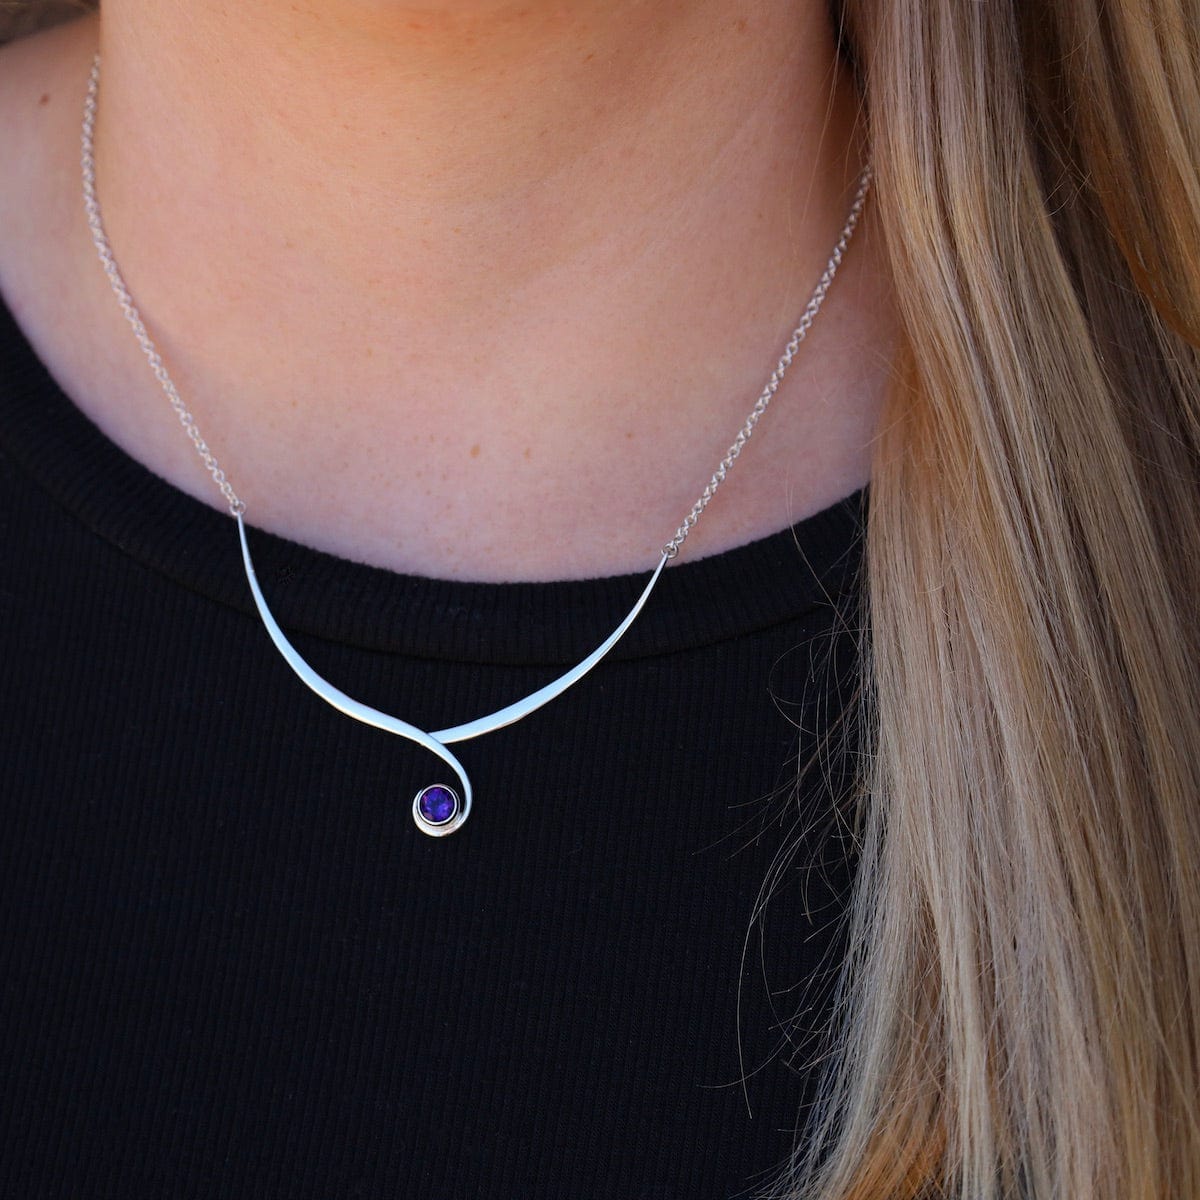 NKL Jasmine Swing Necklace with Amethyst